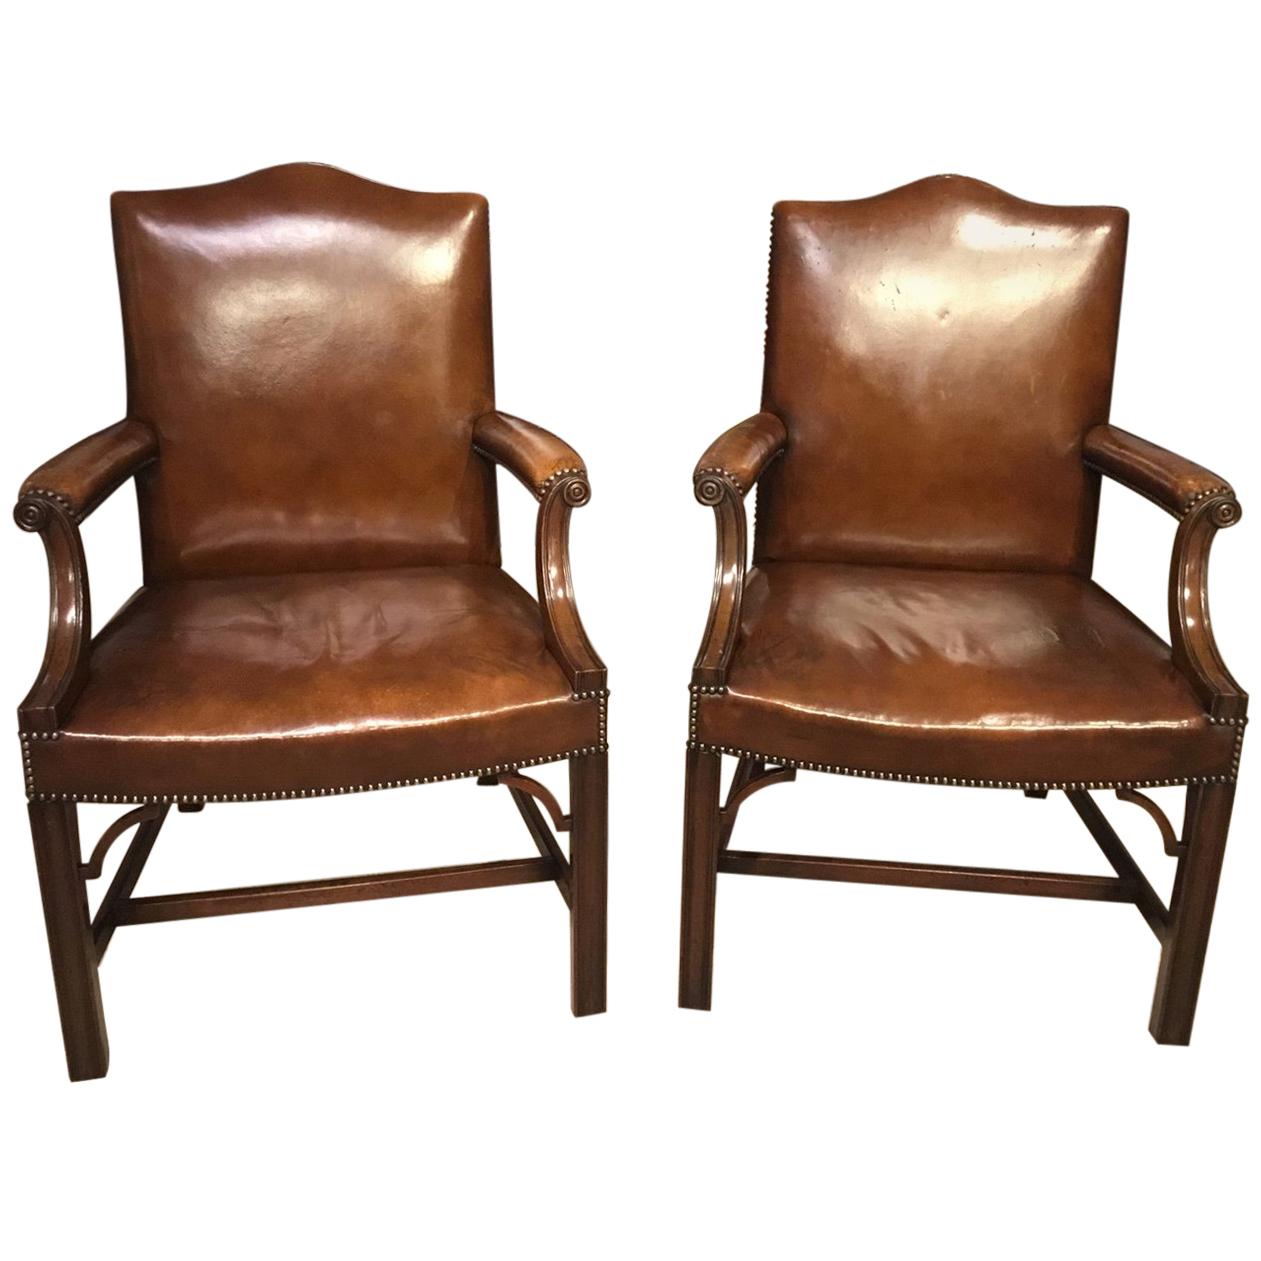 Fine Quality Pair of Mahogany Gainsborough Armchairs